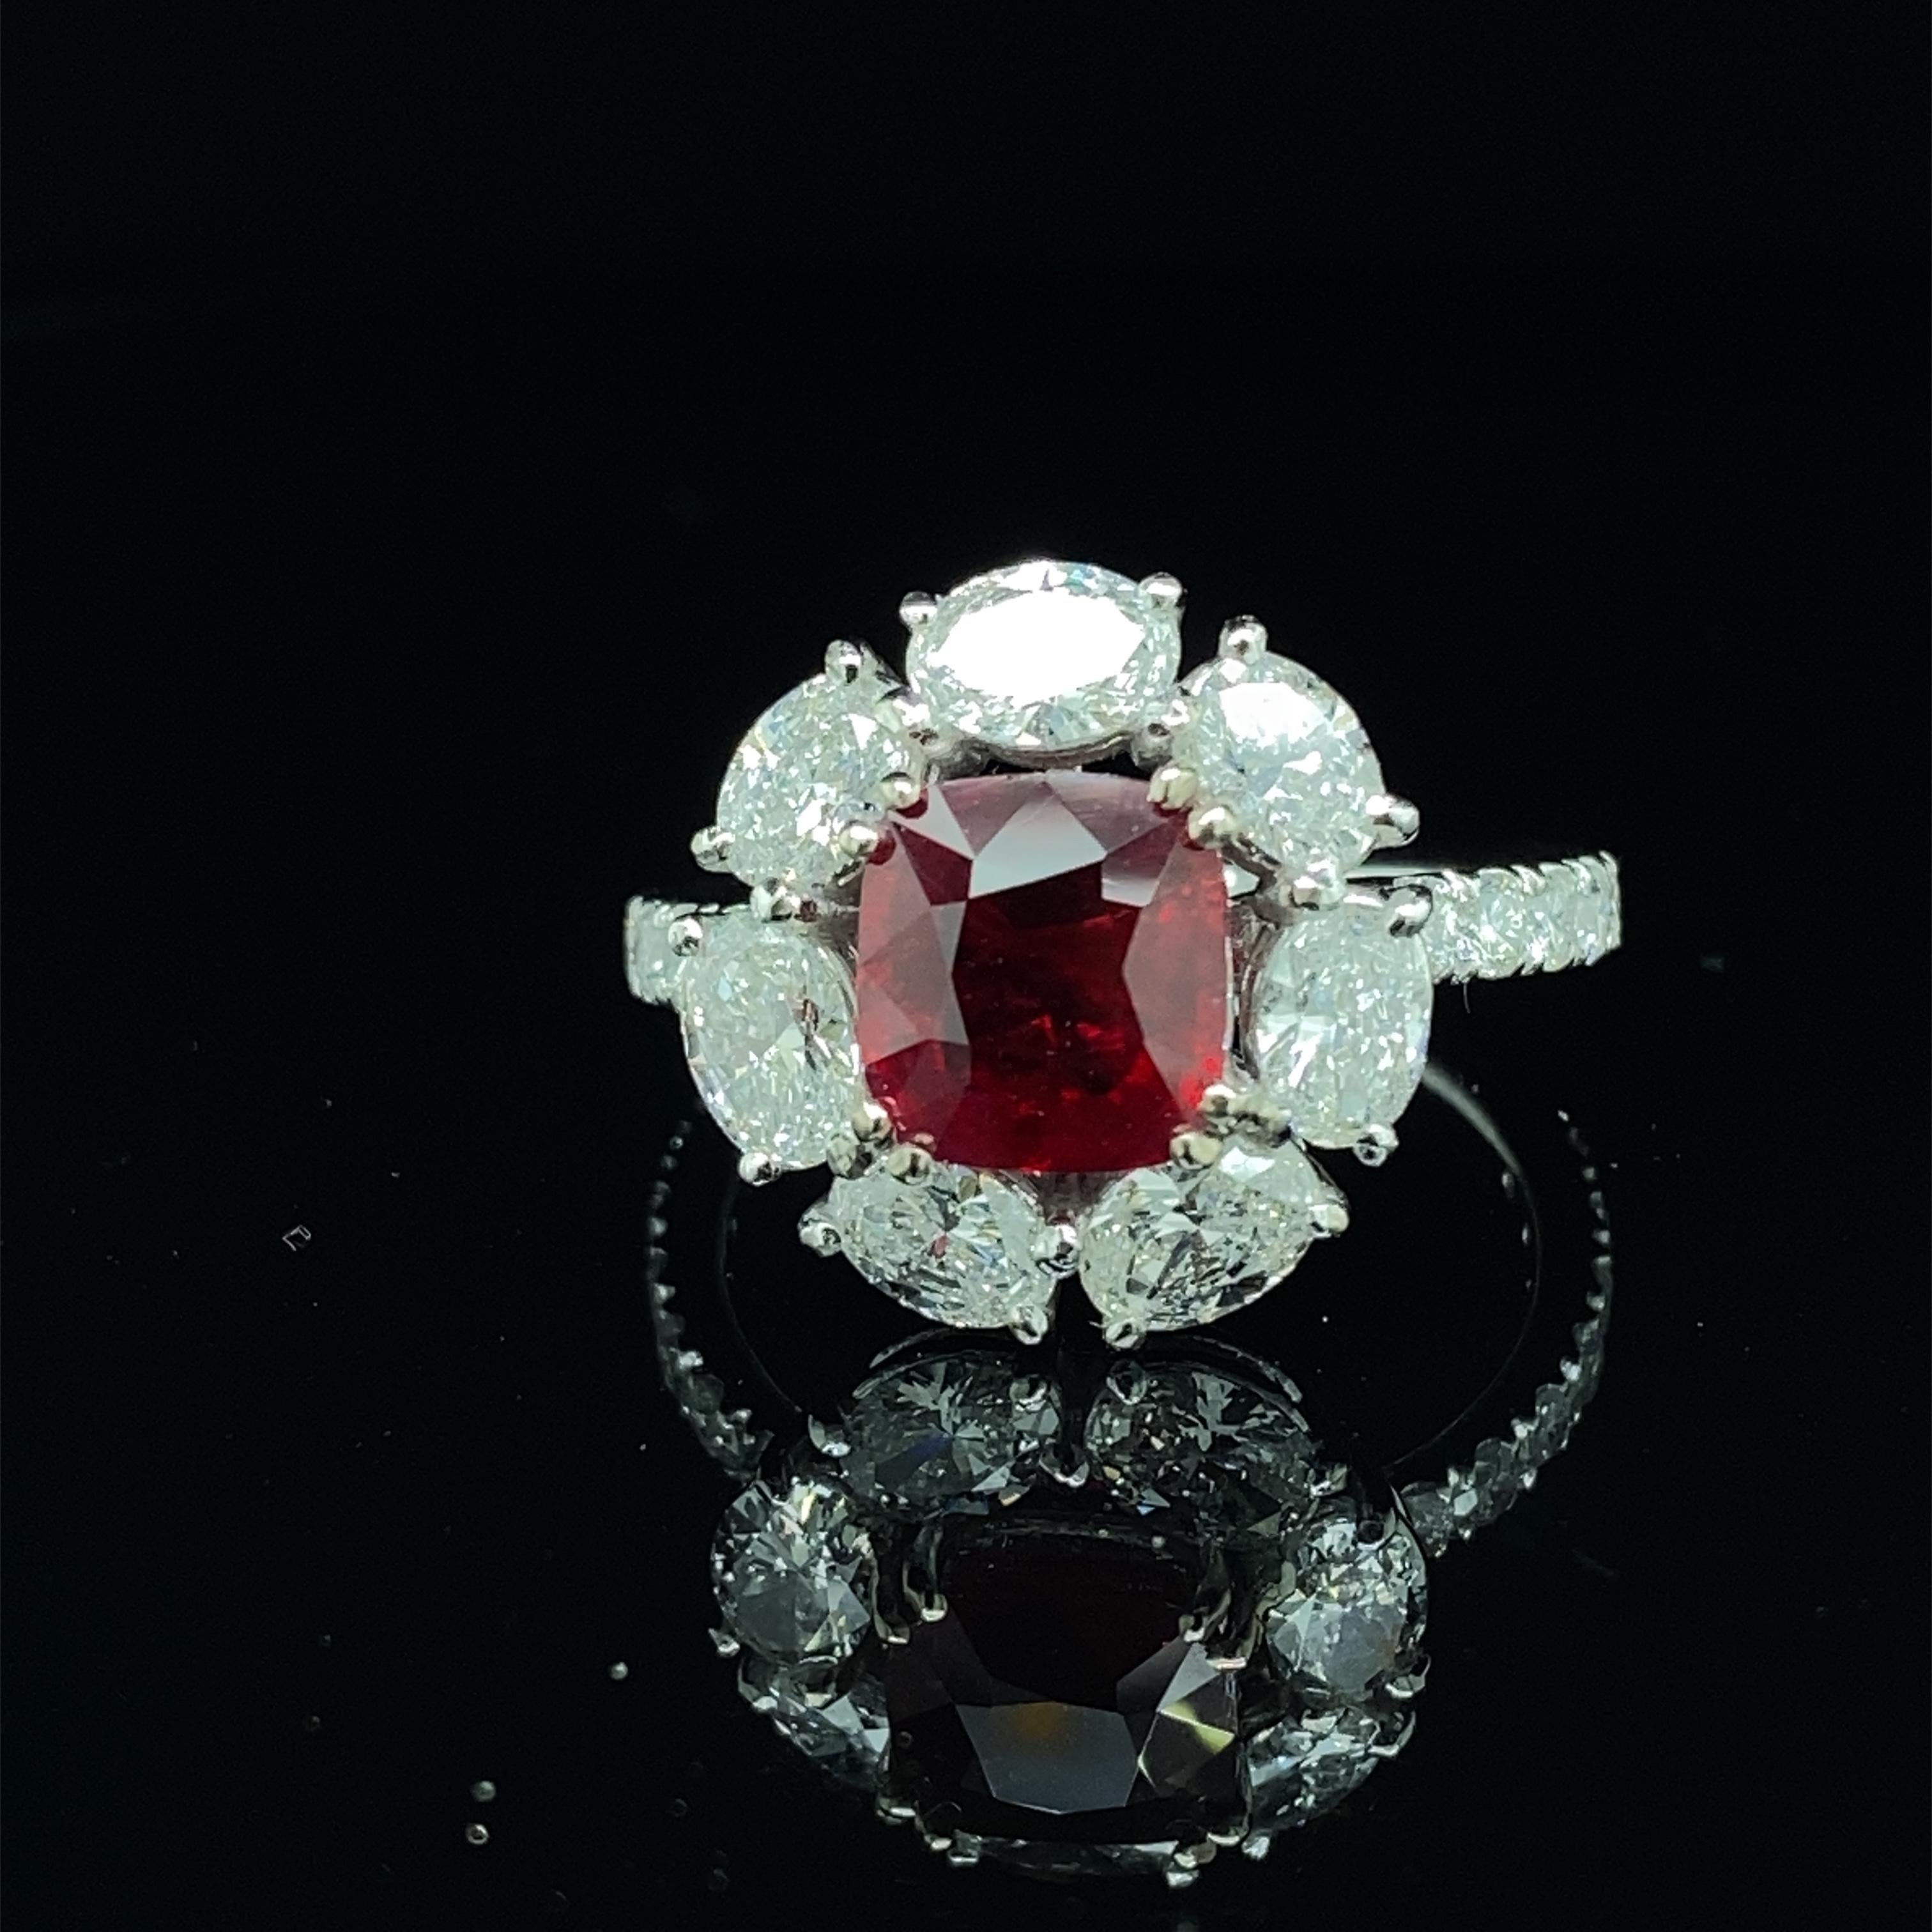 2.02 Carat GRS Gubelin Certified Burma No Heat Pigeon's Blood Red Ruby Gold Ring:

A superb and rare jewel, it features a stunning GRS and Gubelin Labs certified Burmese unheated pigeon's blood red ruby weighing 2.02 carat, surrounded by a halo of